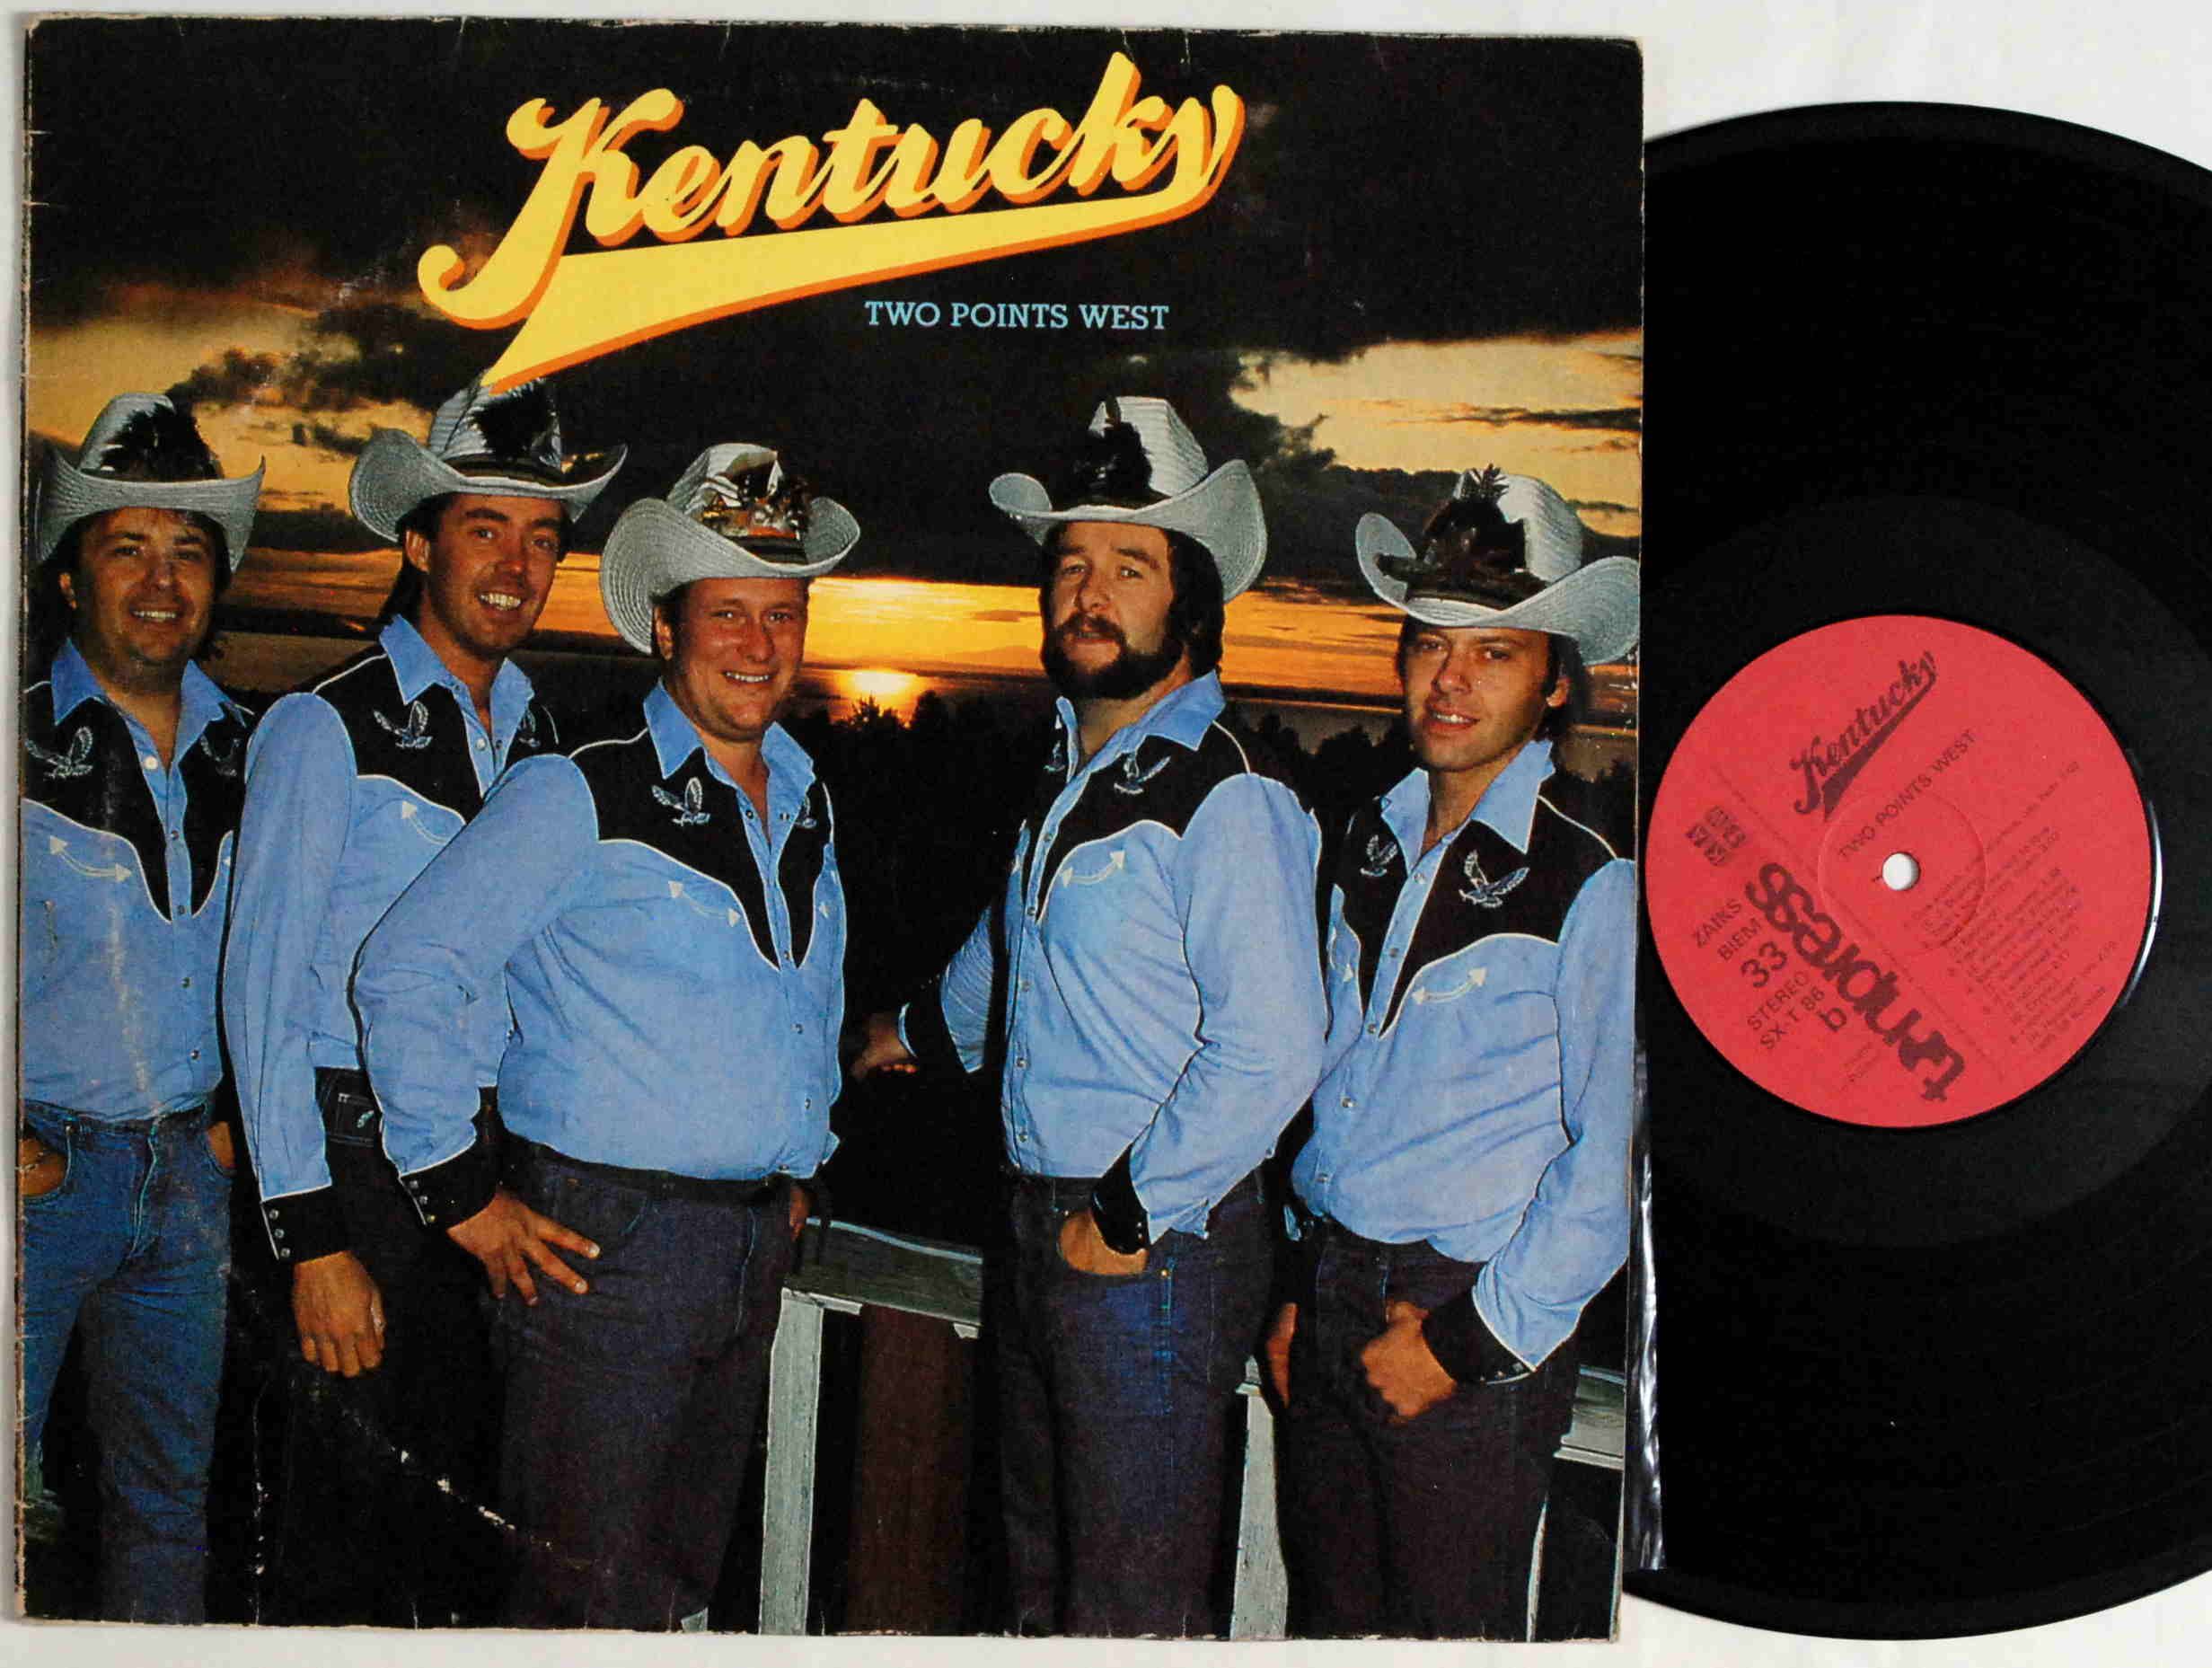 Kentucky - Two Points West (SX-T 86)